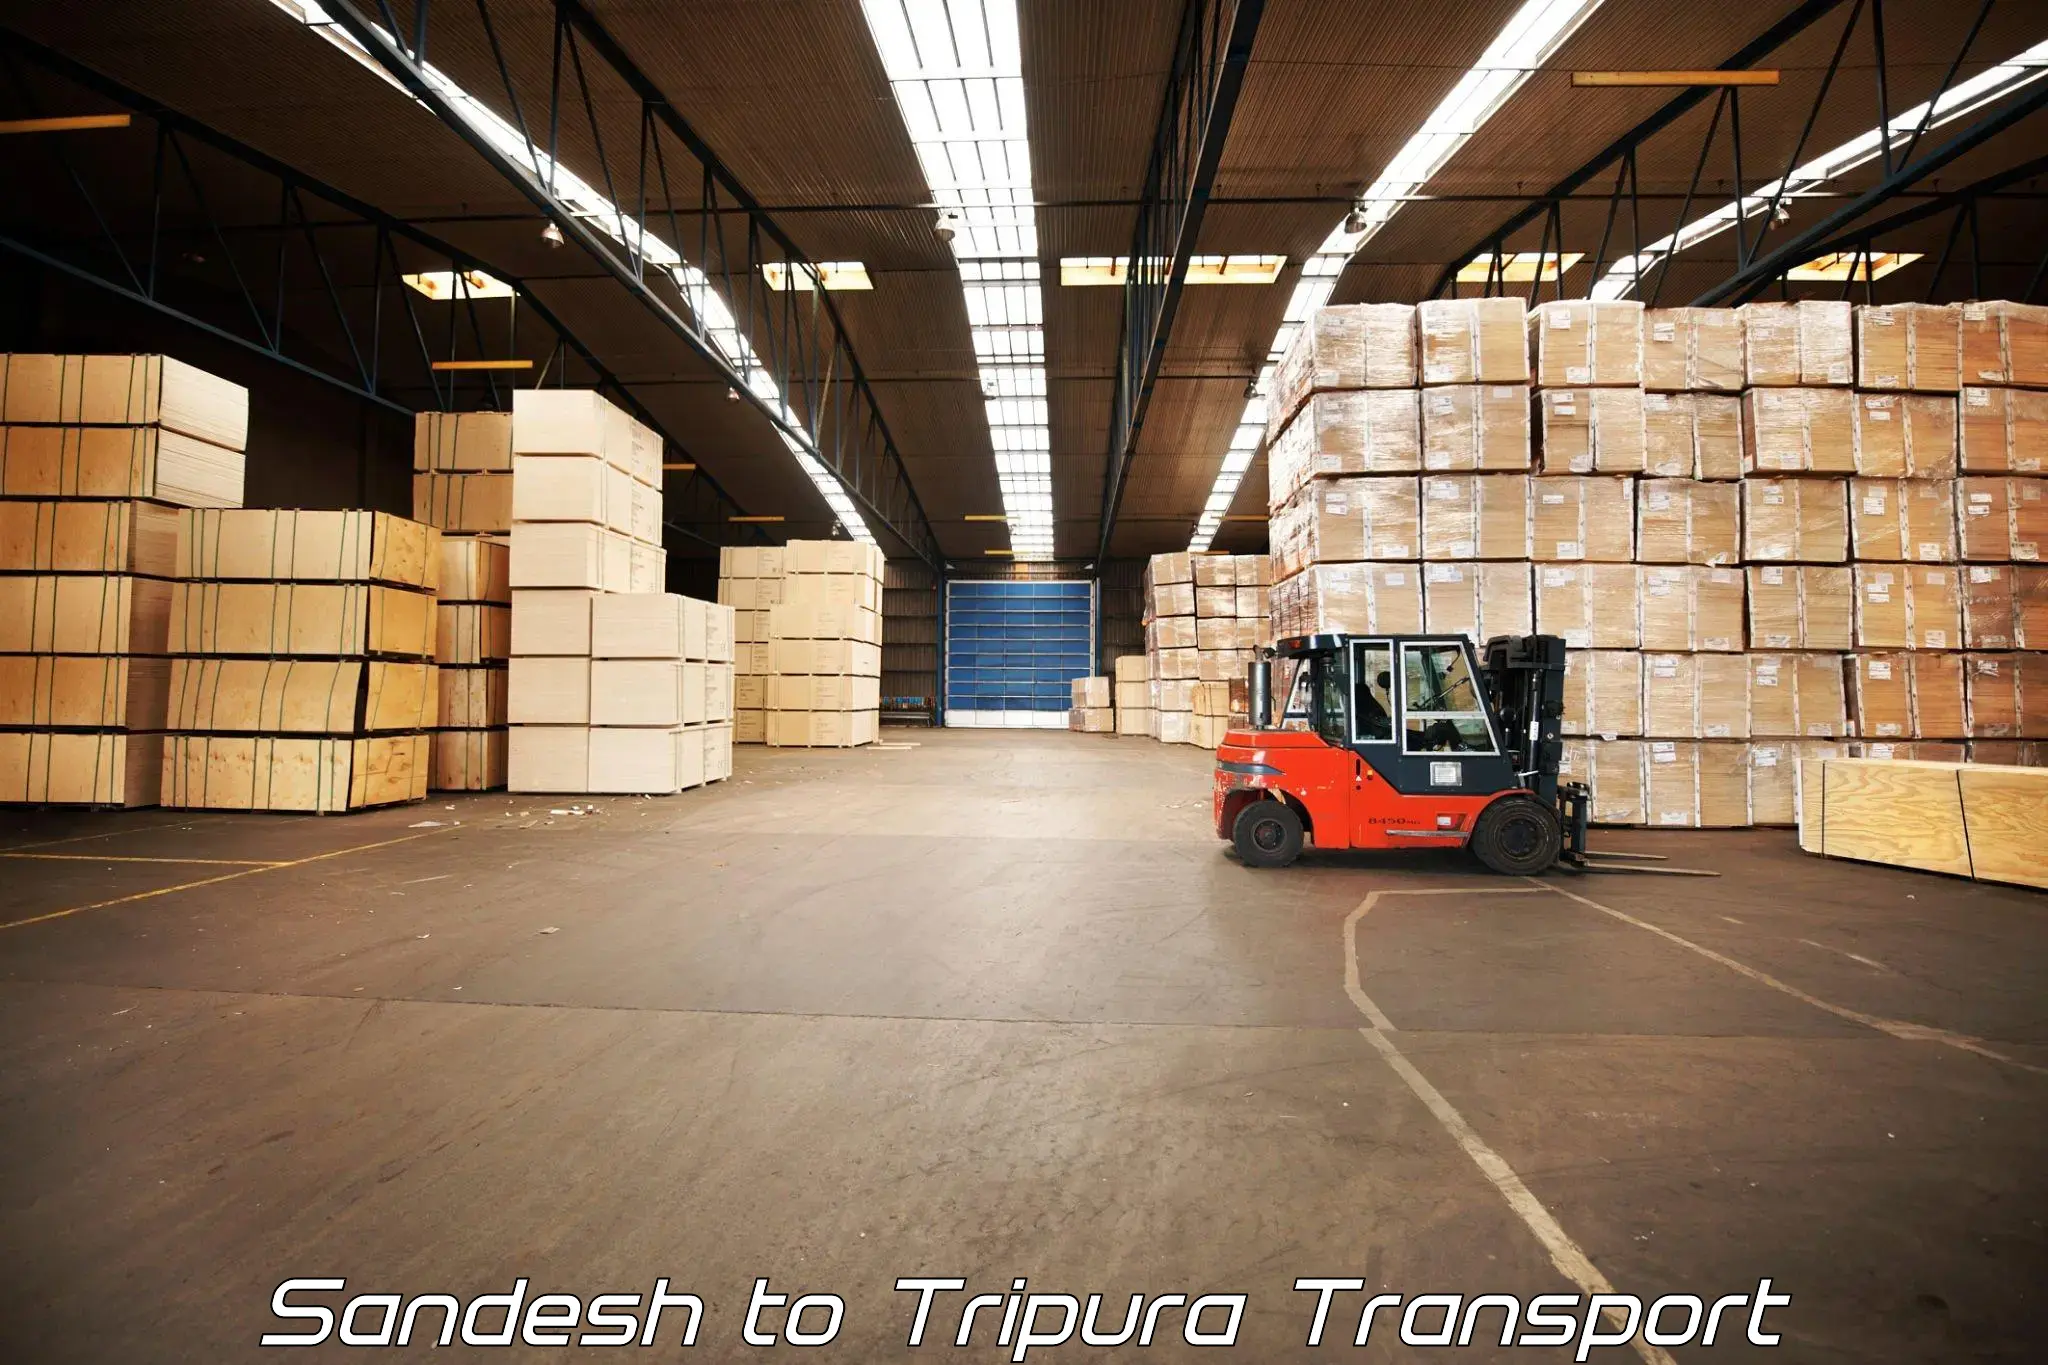 Air freight transport services Sandesh to Udaipur Tripura